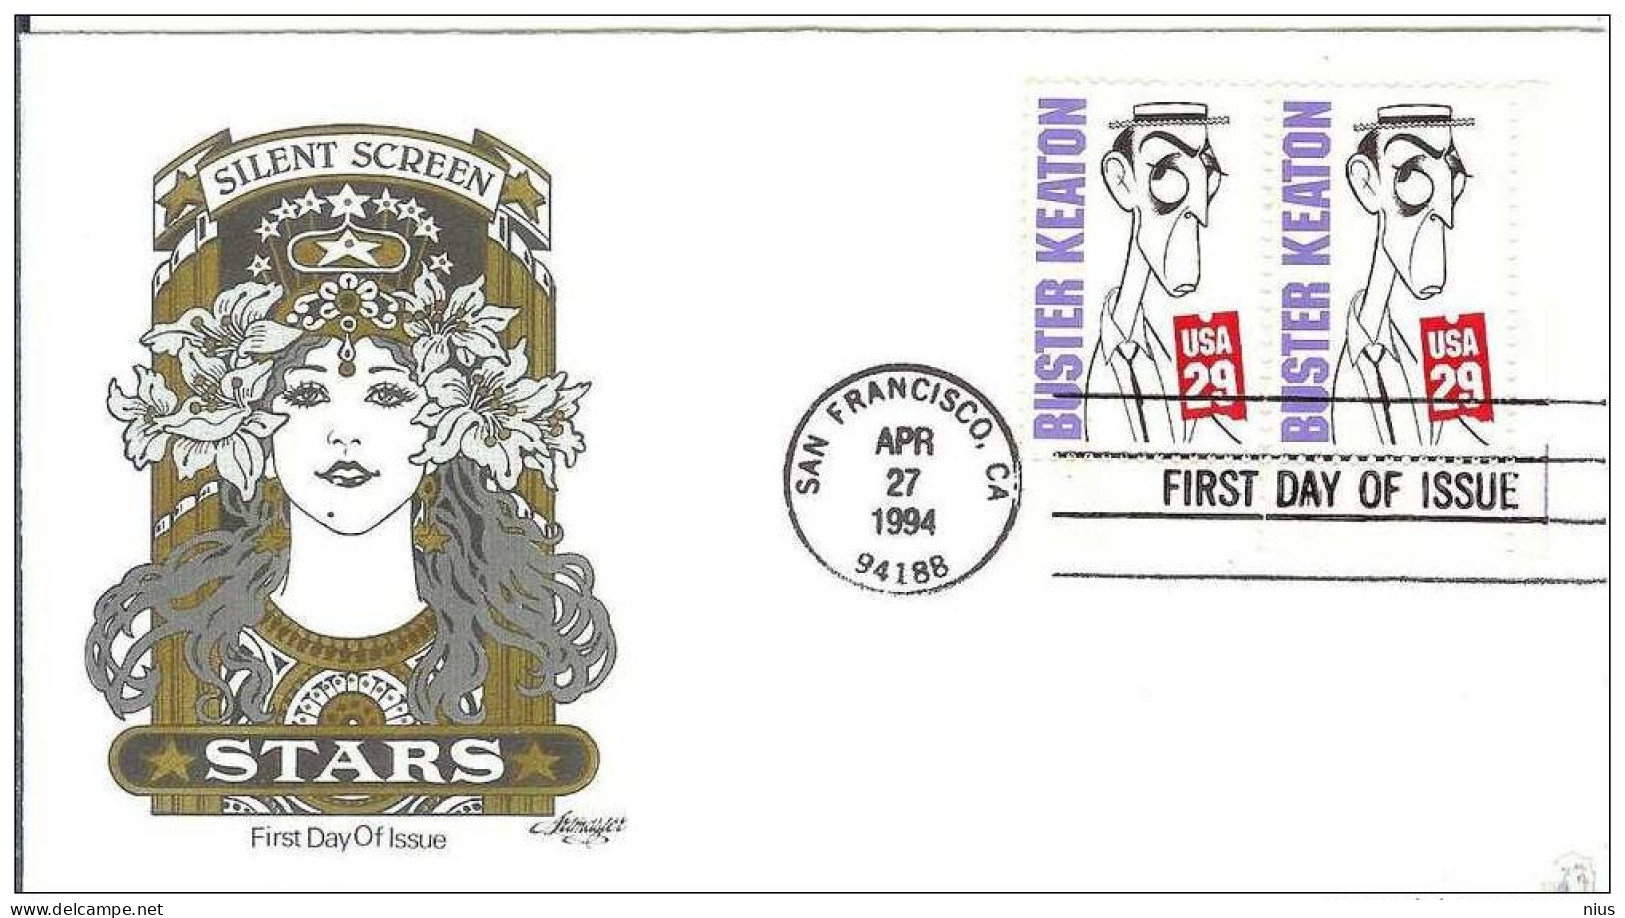 USA United States 1994 FDC Actor Buster Keaton Film Cinema Movie Comedy Silent Screen Comedians - 1991-2000